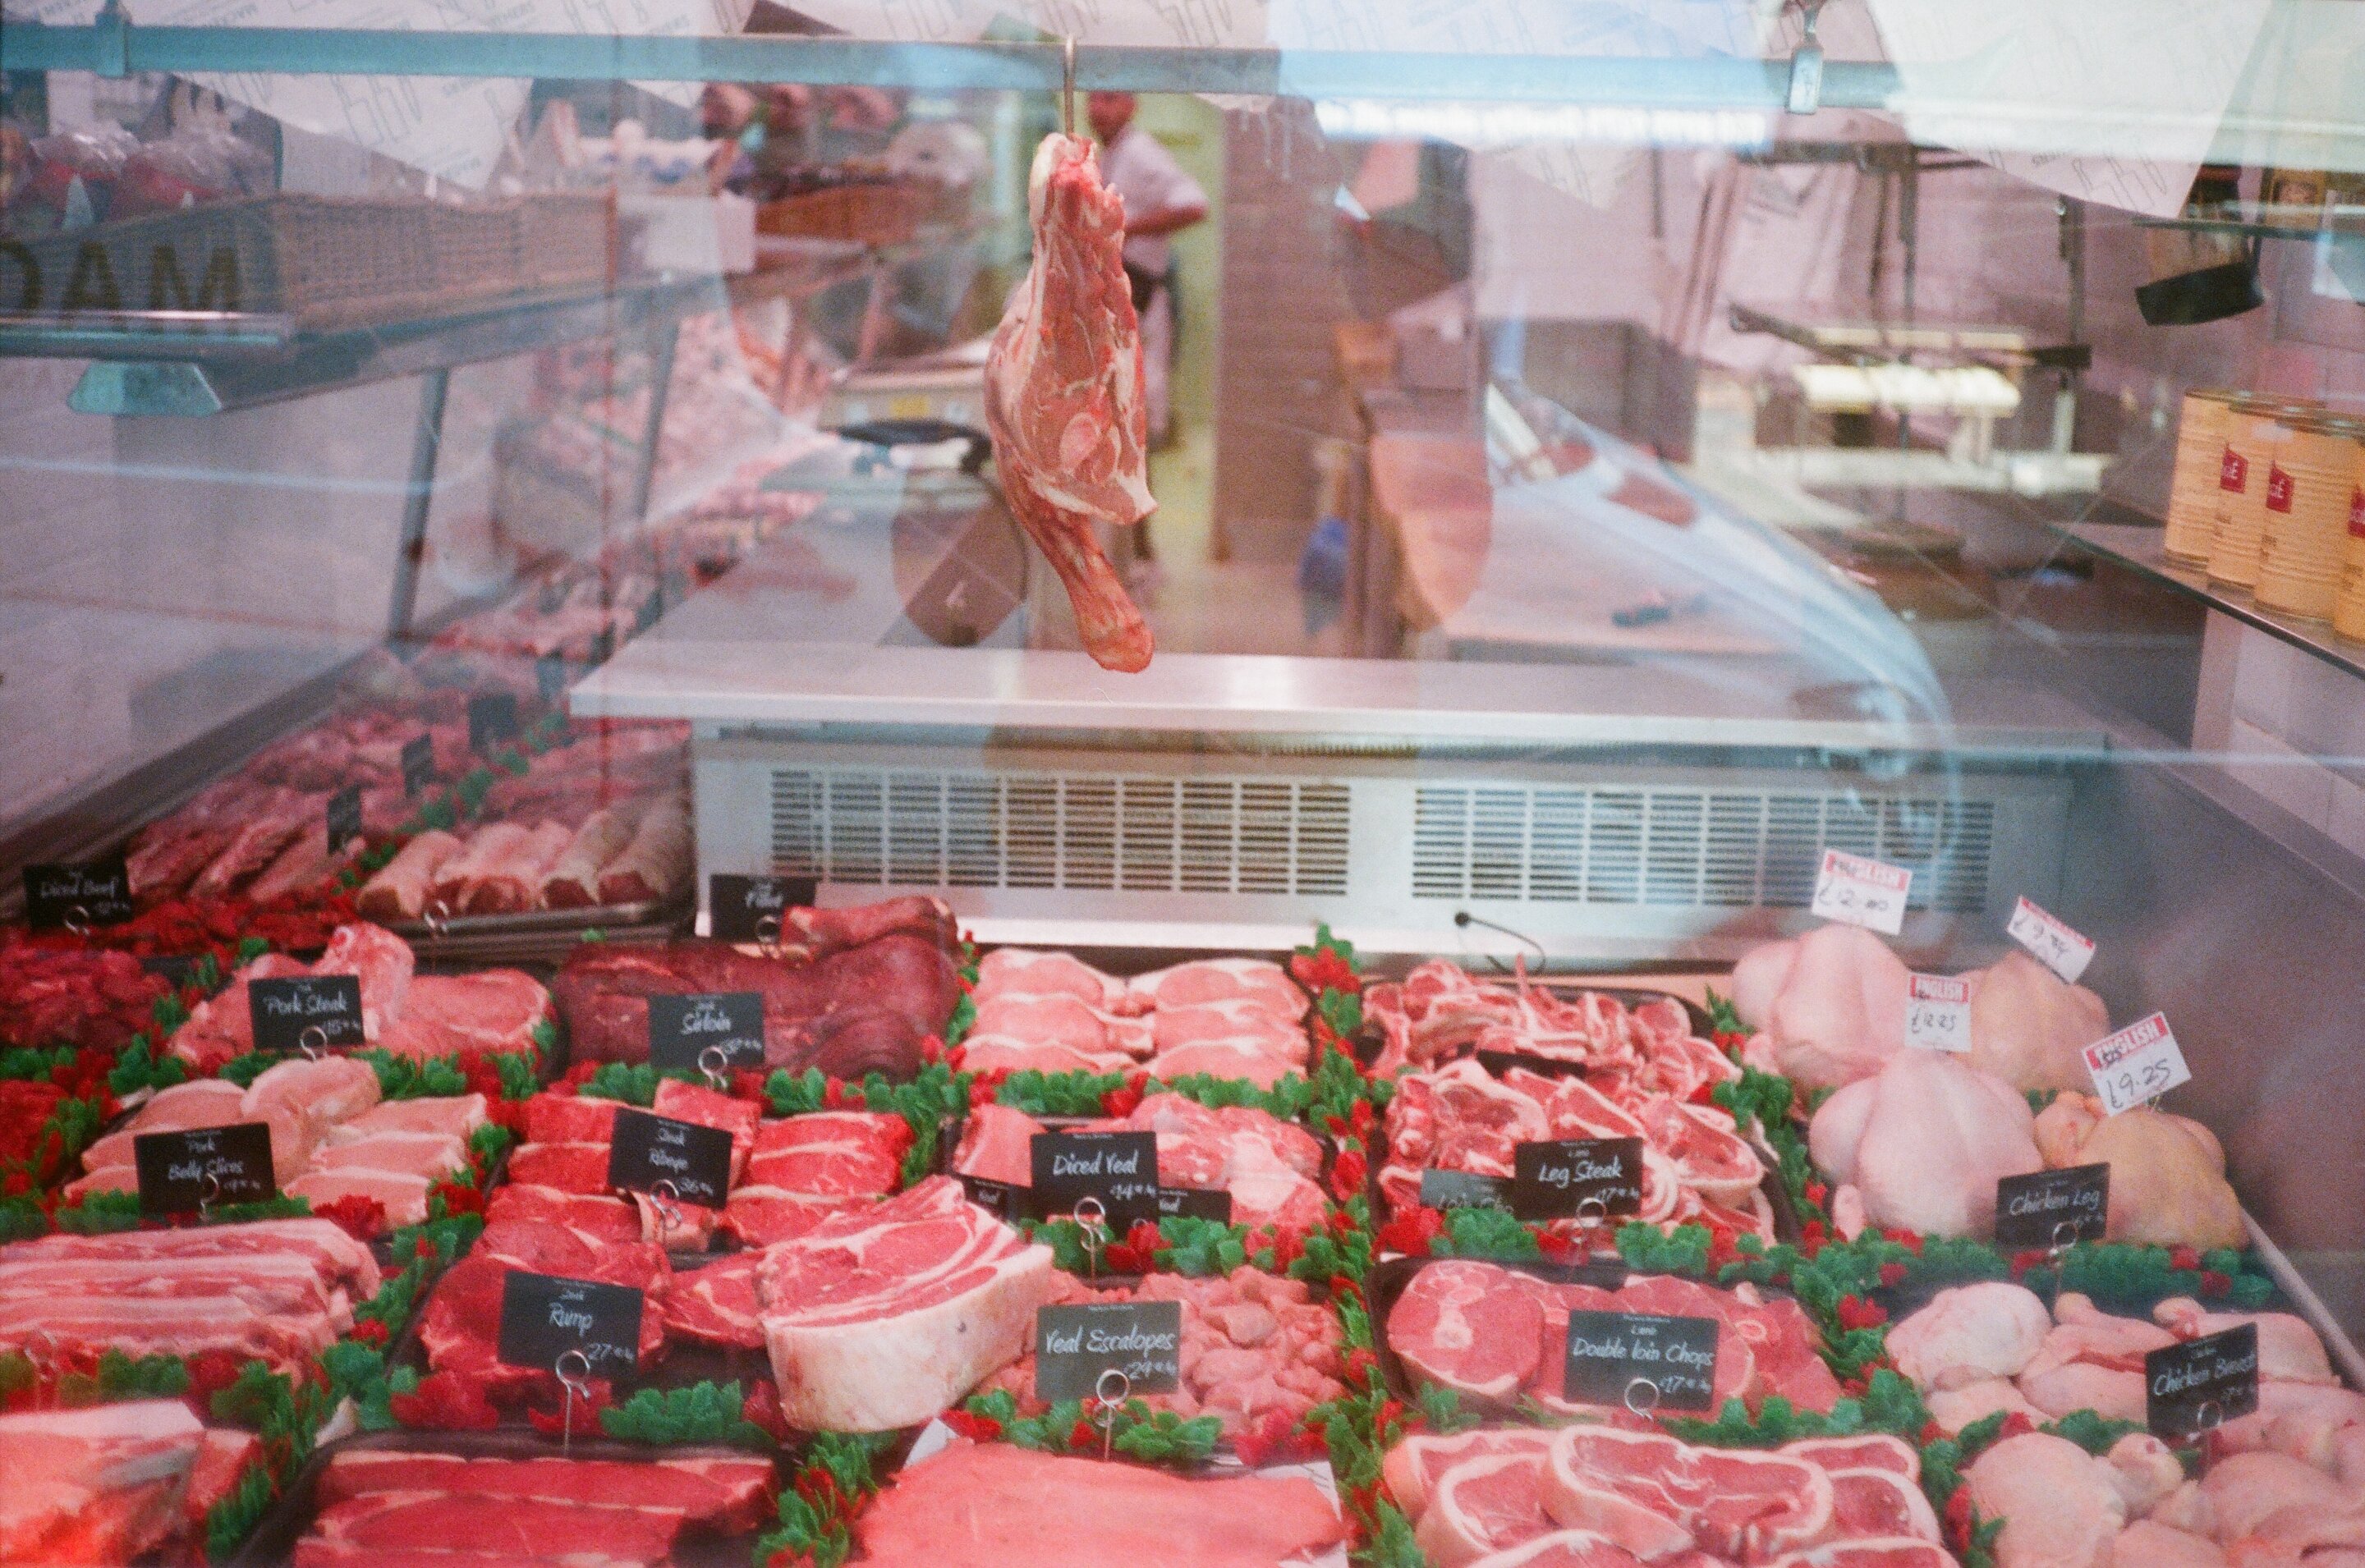 Question: What is lab-grown meat, and how does it compare to real